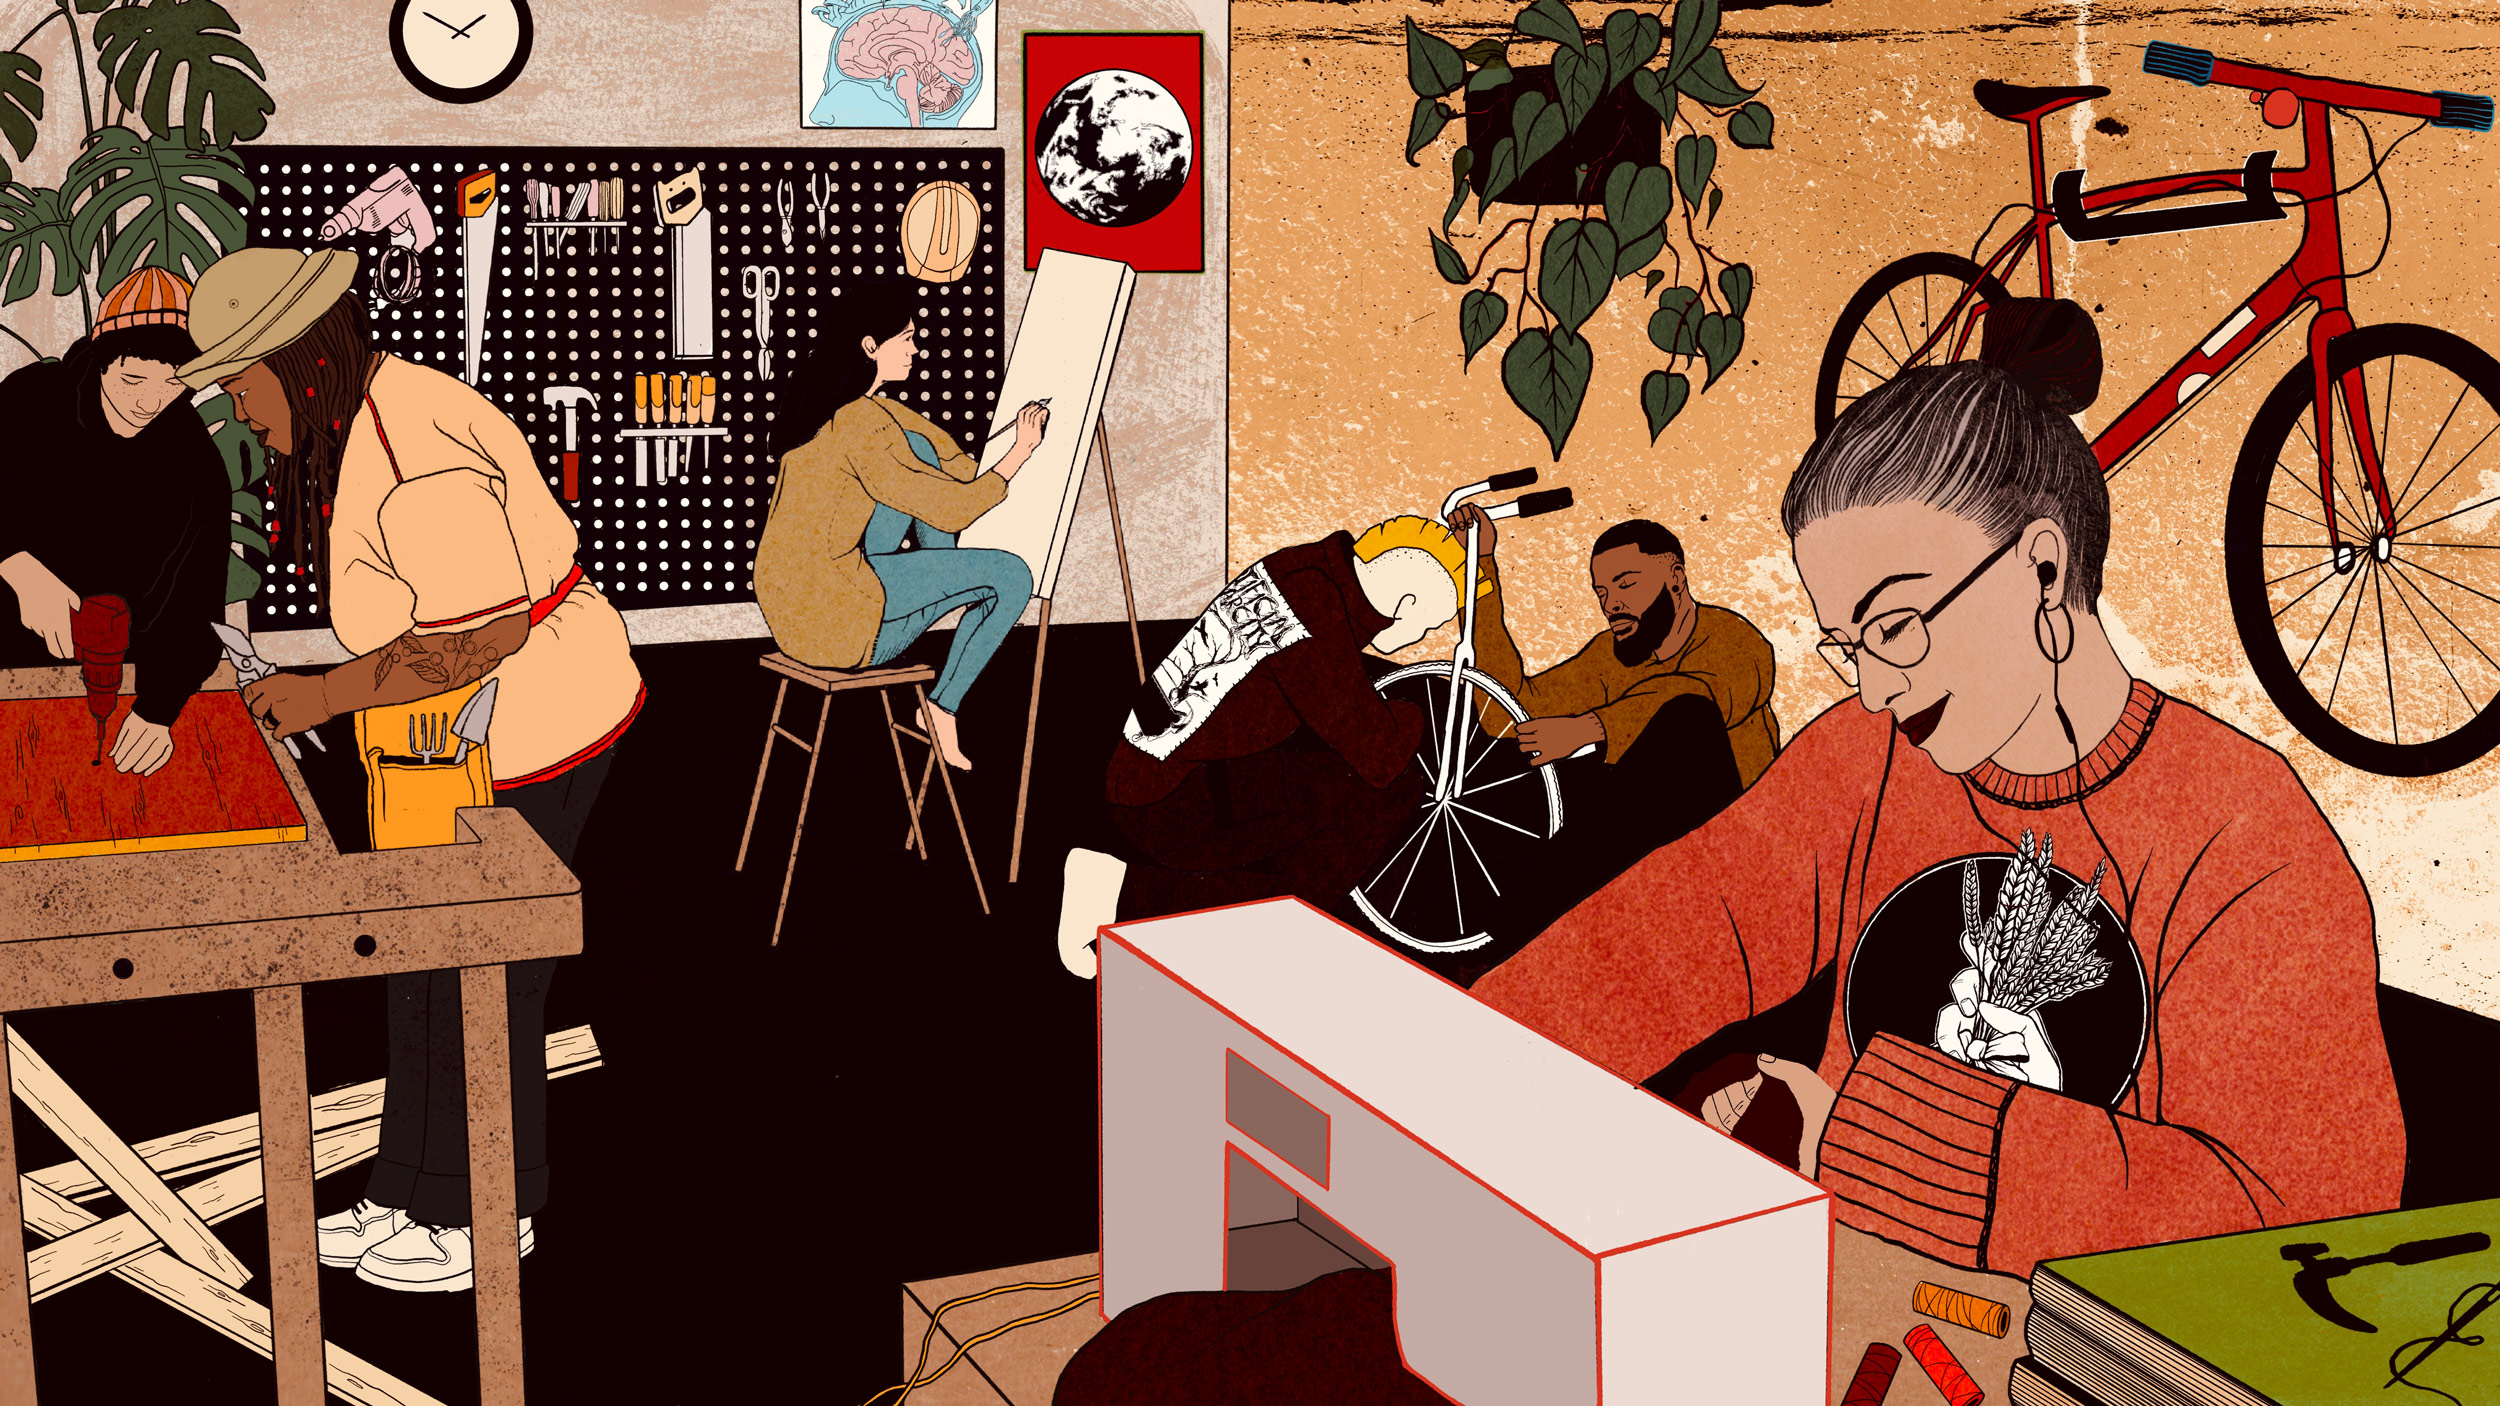 an illustration of several people working in the same room. two are woodworking, two are fixing a bike, one is sewing, and one is painting. they are all young adults and they're a mix of different races and fashion styles